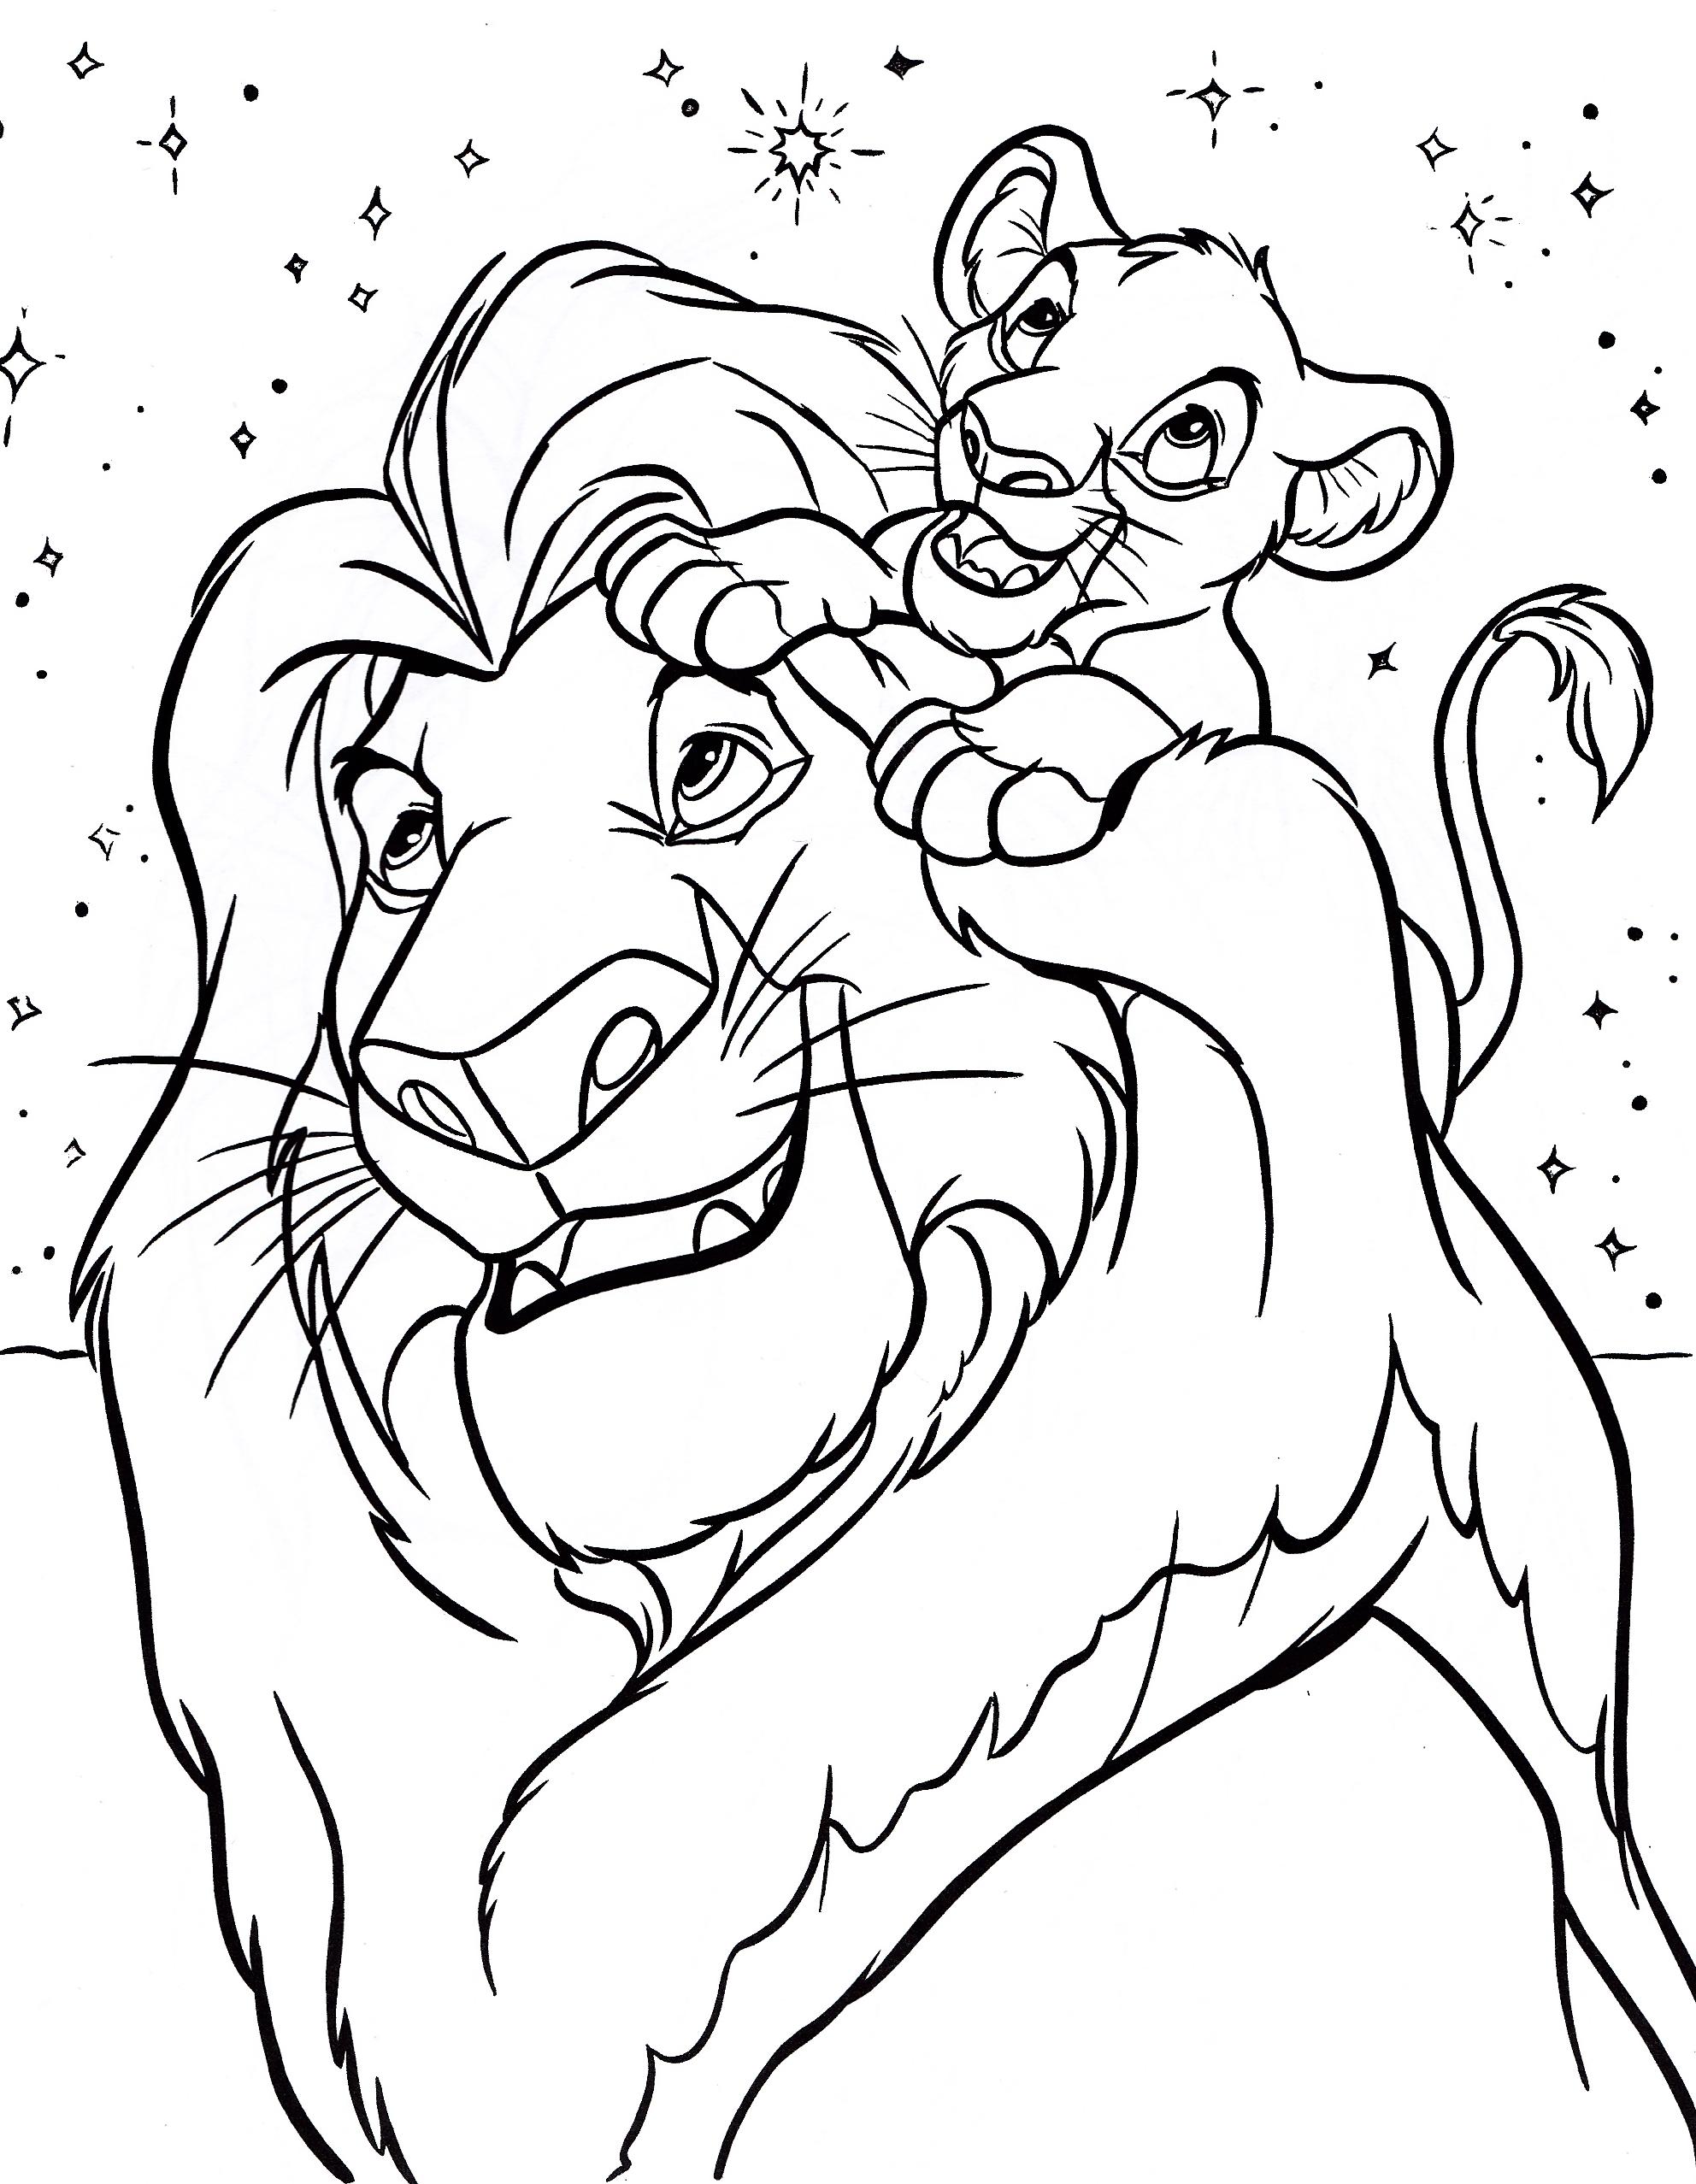 Coloring pages disney coloring pages lion king